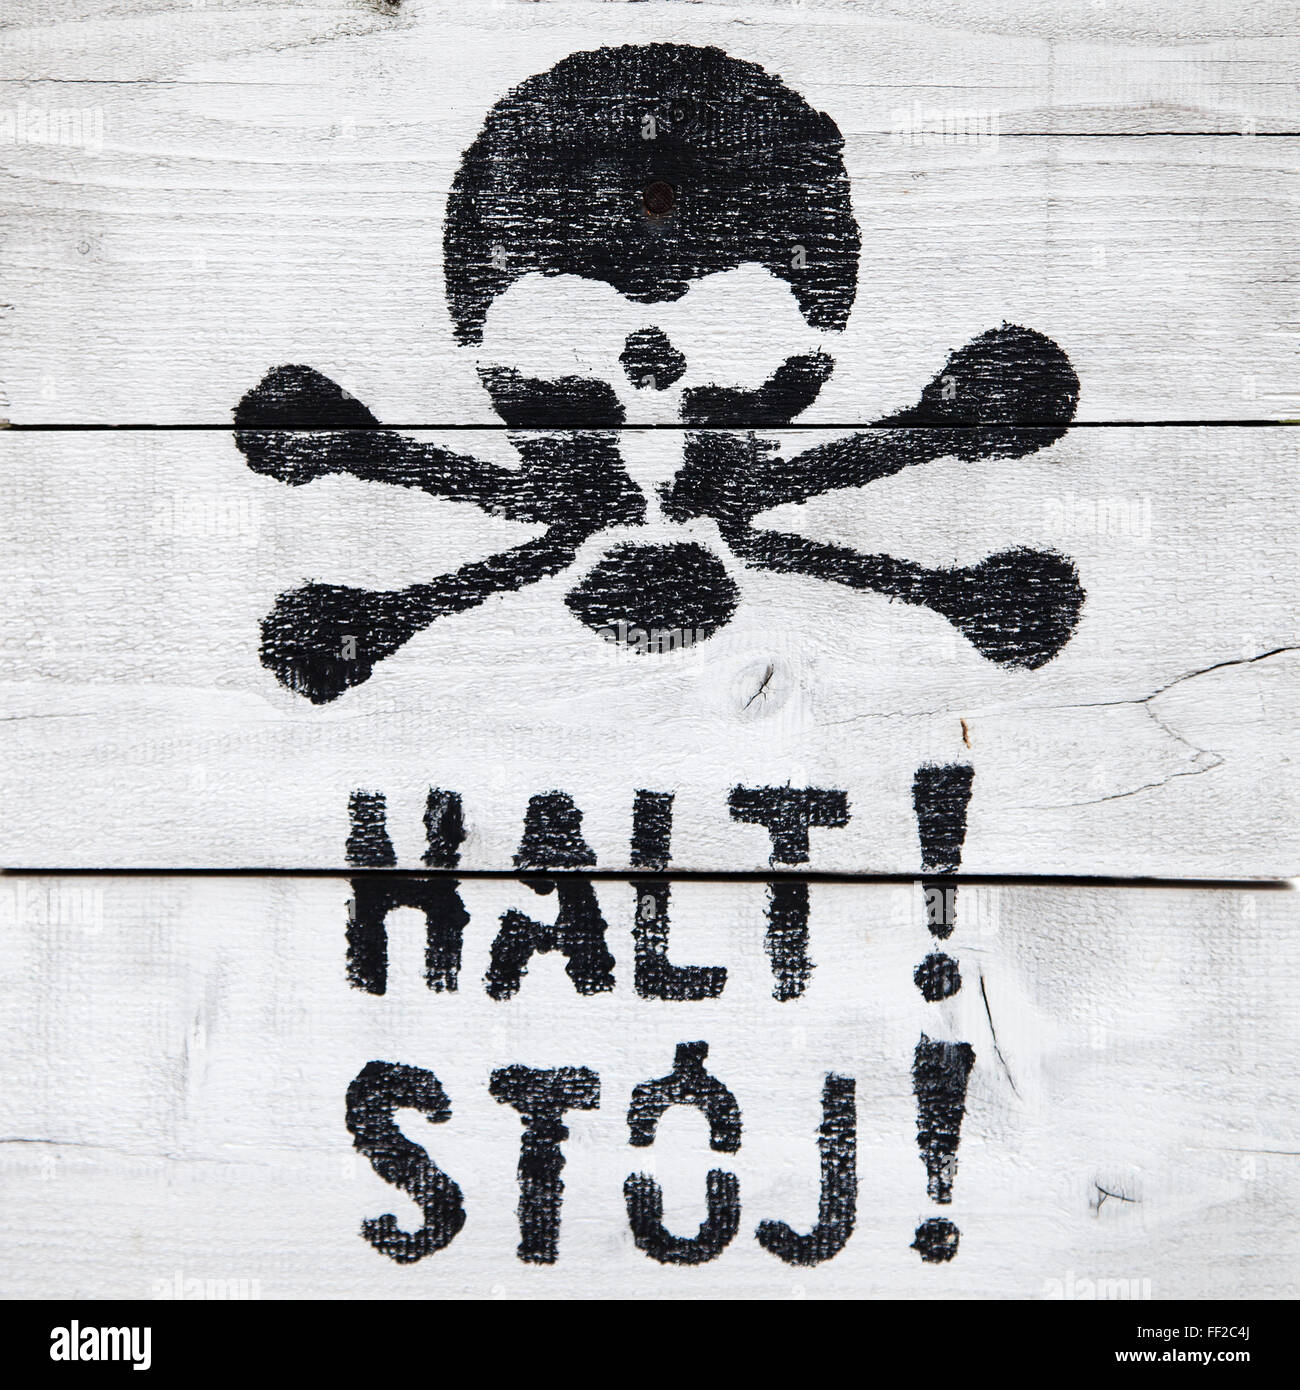 Halt! Stoj! Stop sign, in german and polish, with a painted skull. Stock Photo